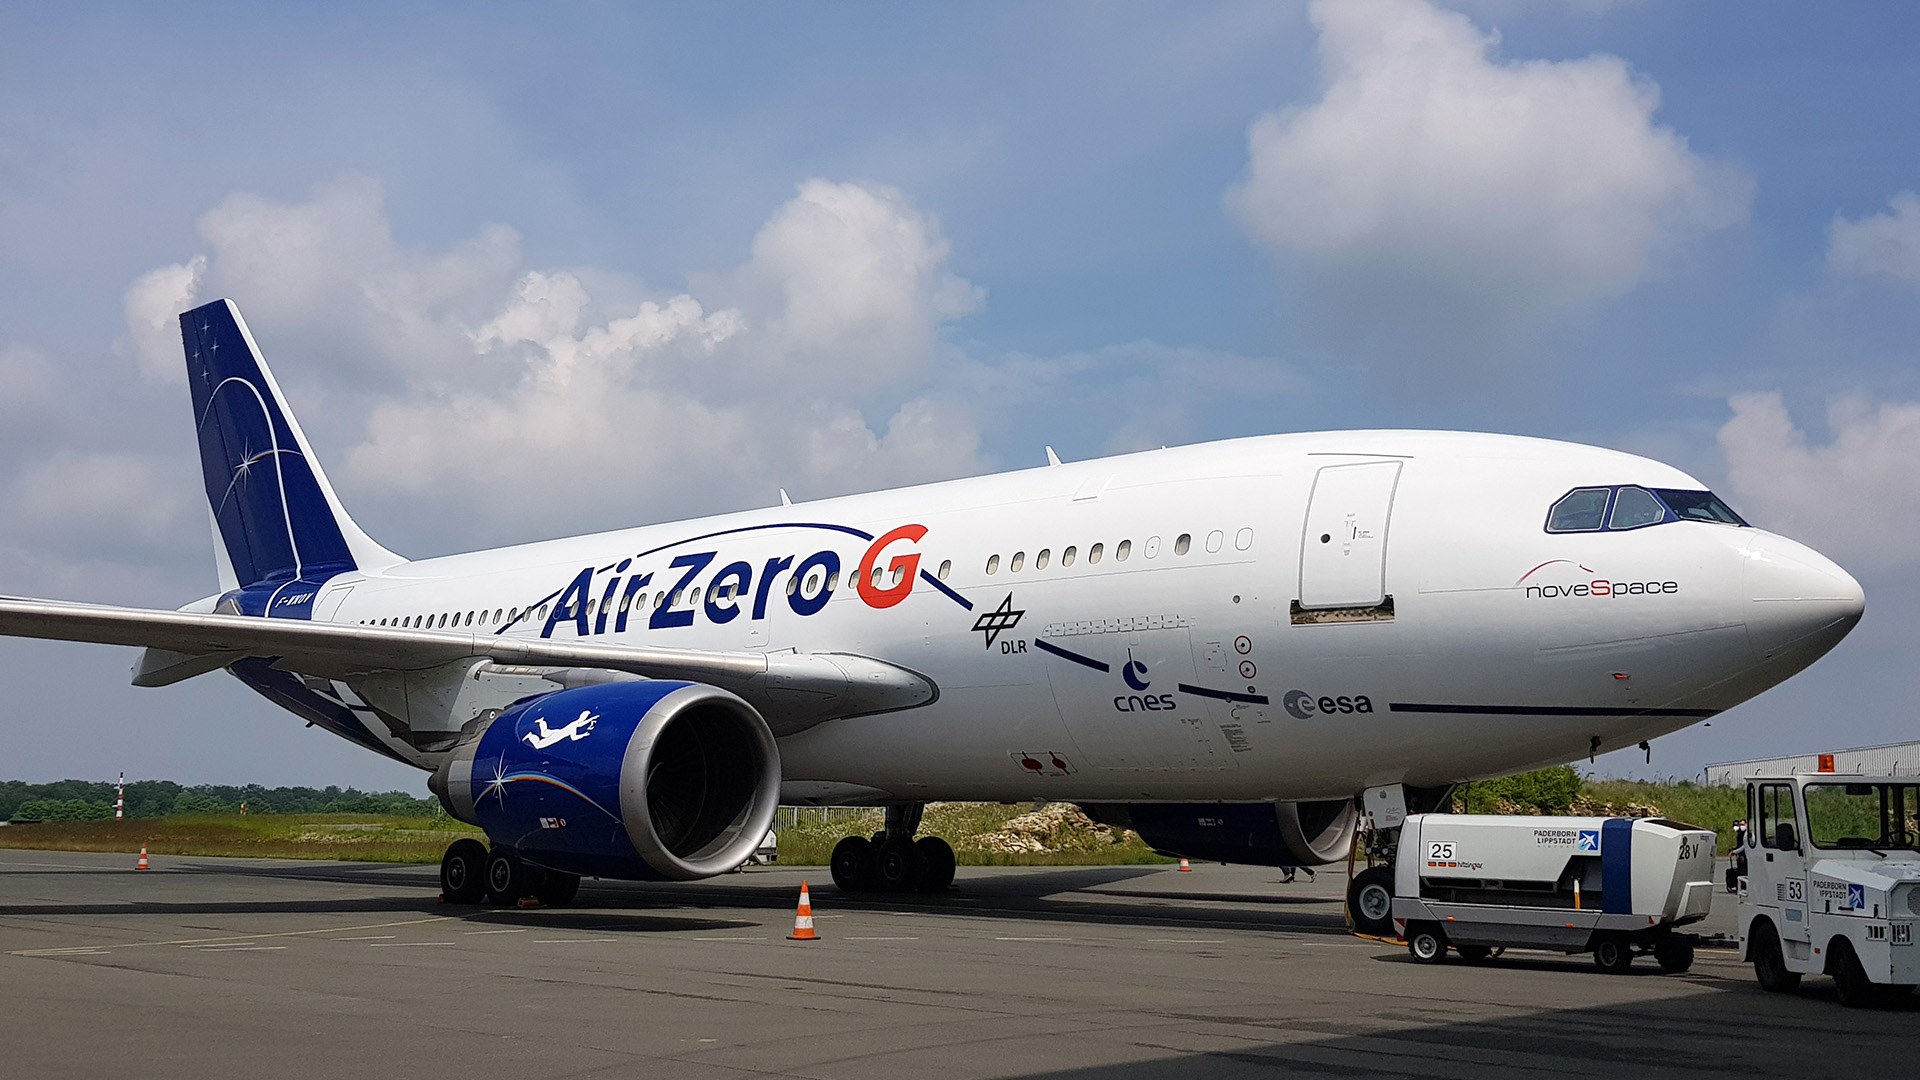 Airbus A310 ZERO-G – ready for the 36th DLR parabolic flight campaign